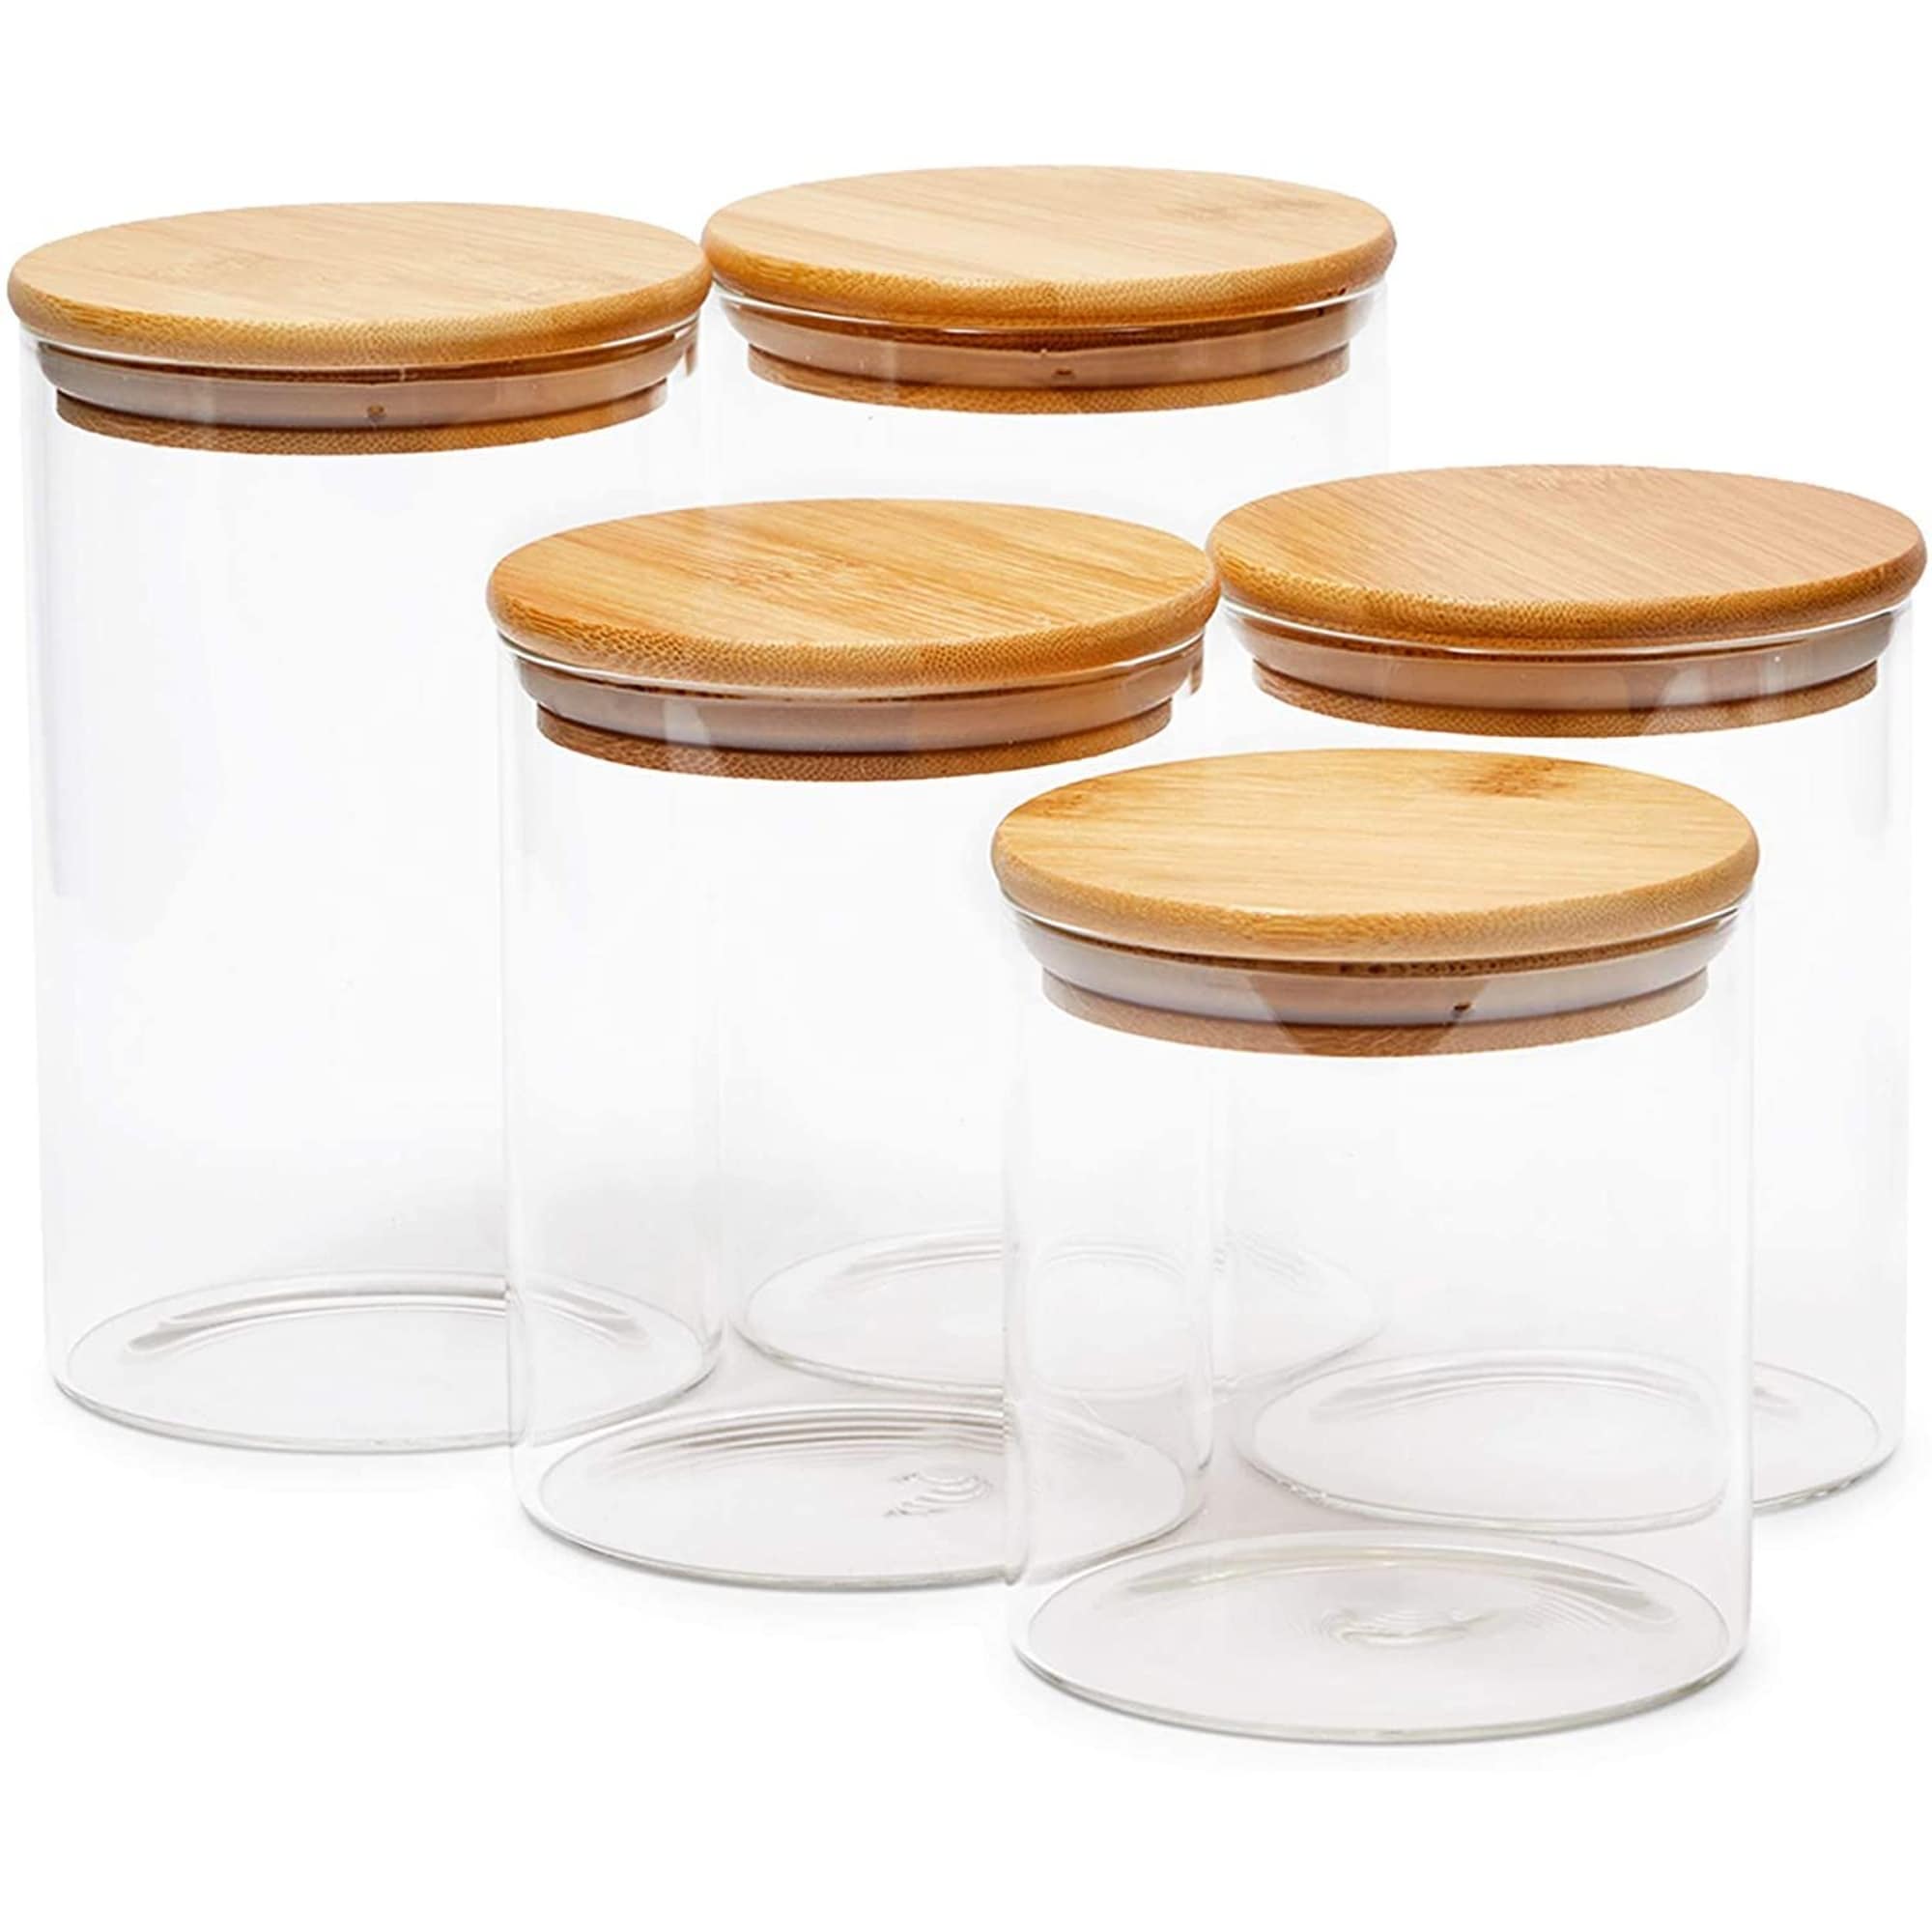 https://ak1.ostkcdn.com/images/products/is/images/direct/e9c94931db3050b652985f6222d35468a16a2a31/Glass-Canisters-with-Airtight-Bamboo-Lids%2C-3-Sizes-for-Pantry-Storage-%285-Pack%29.jpg